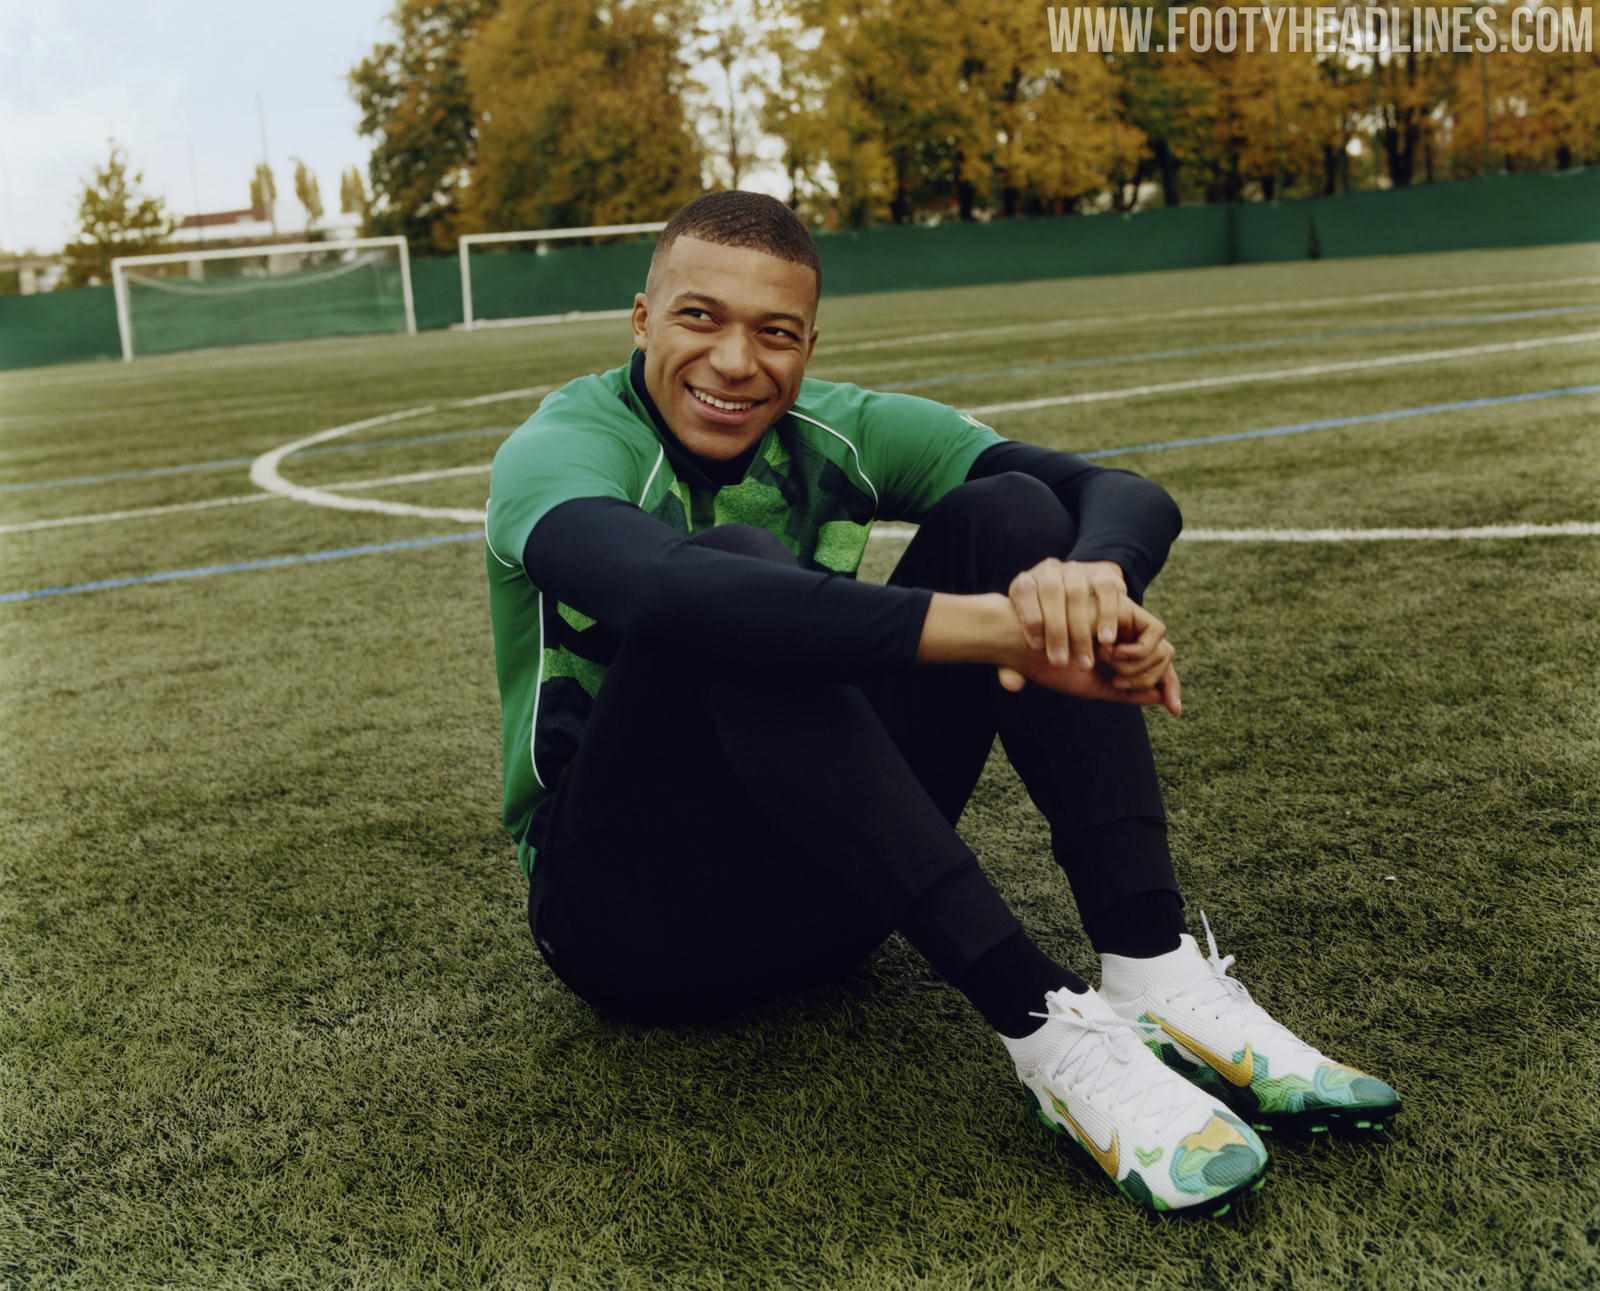 Wholesale Nike Mercurial Superfly Mbappe 'Bondy Dreams' Boots Released ...